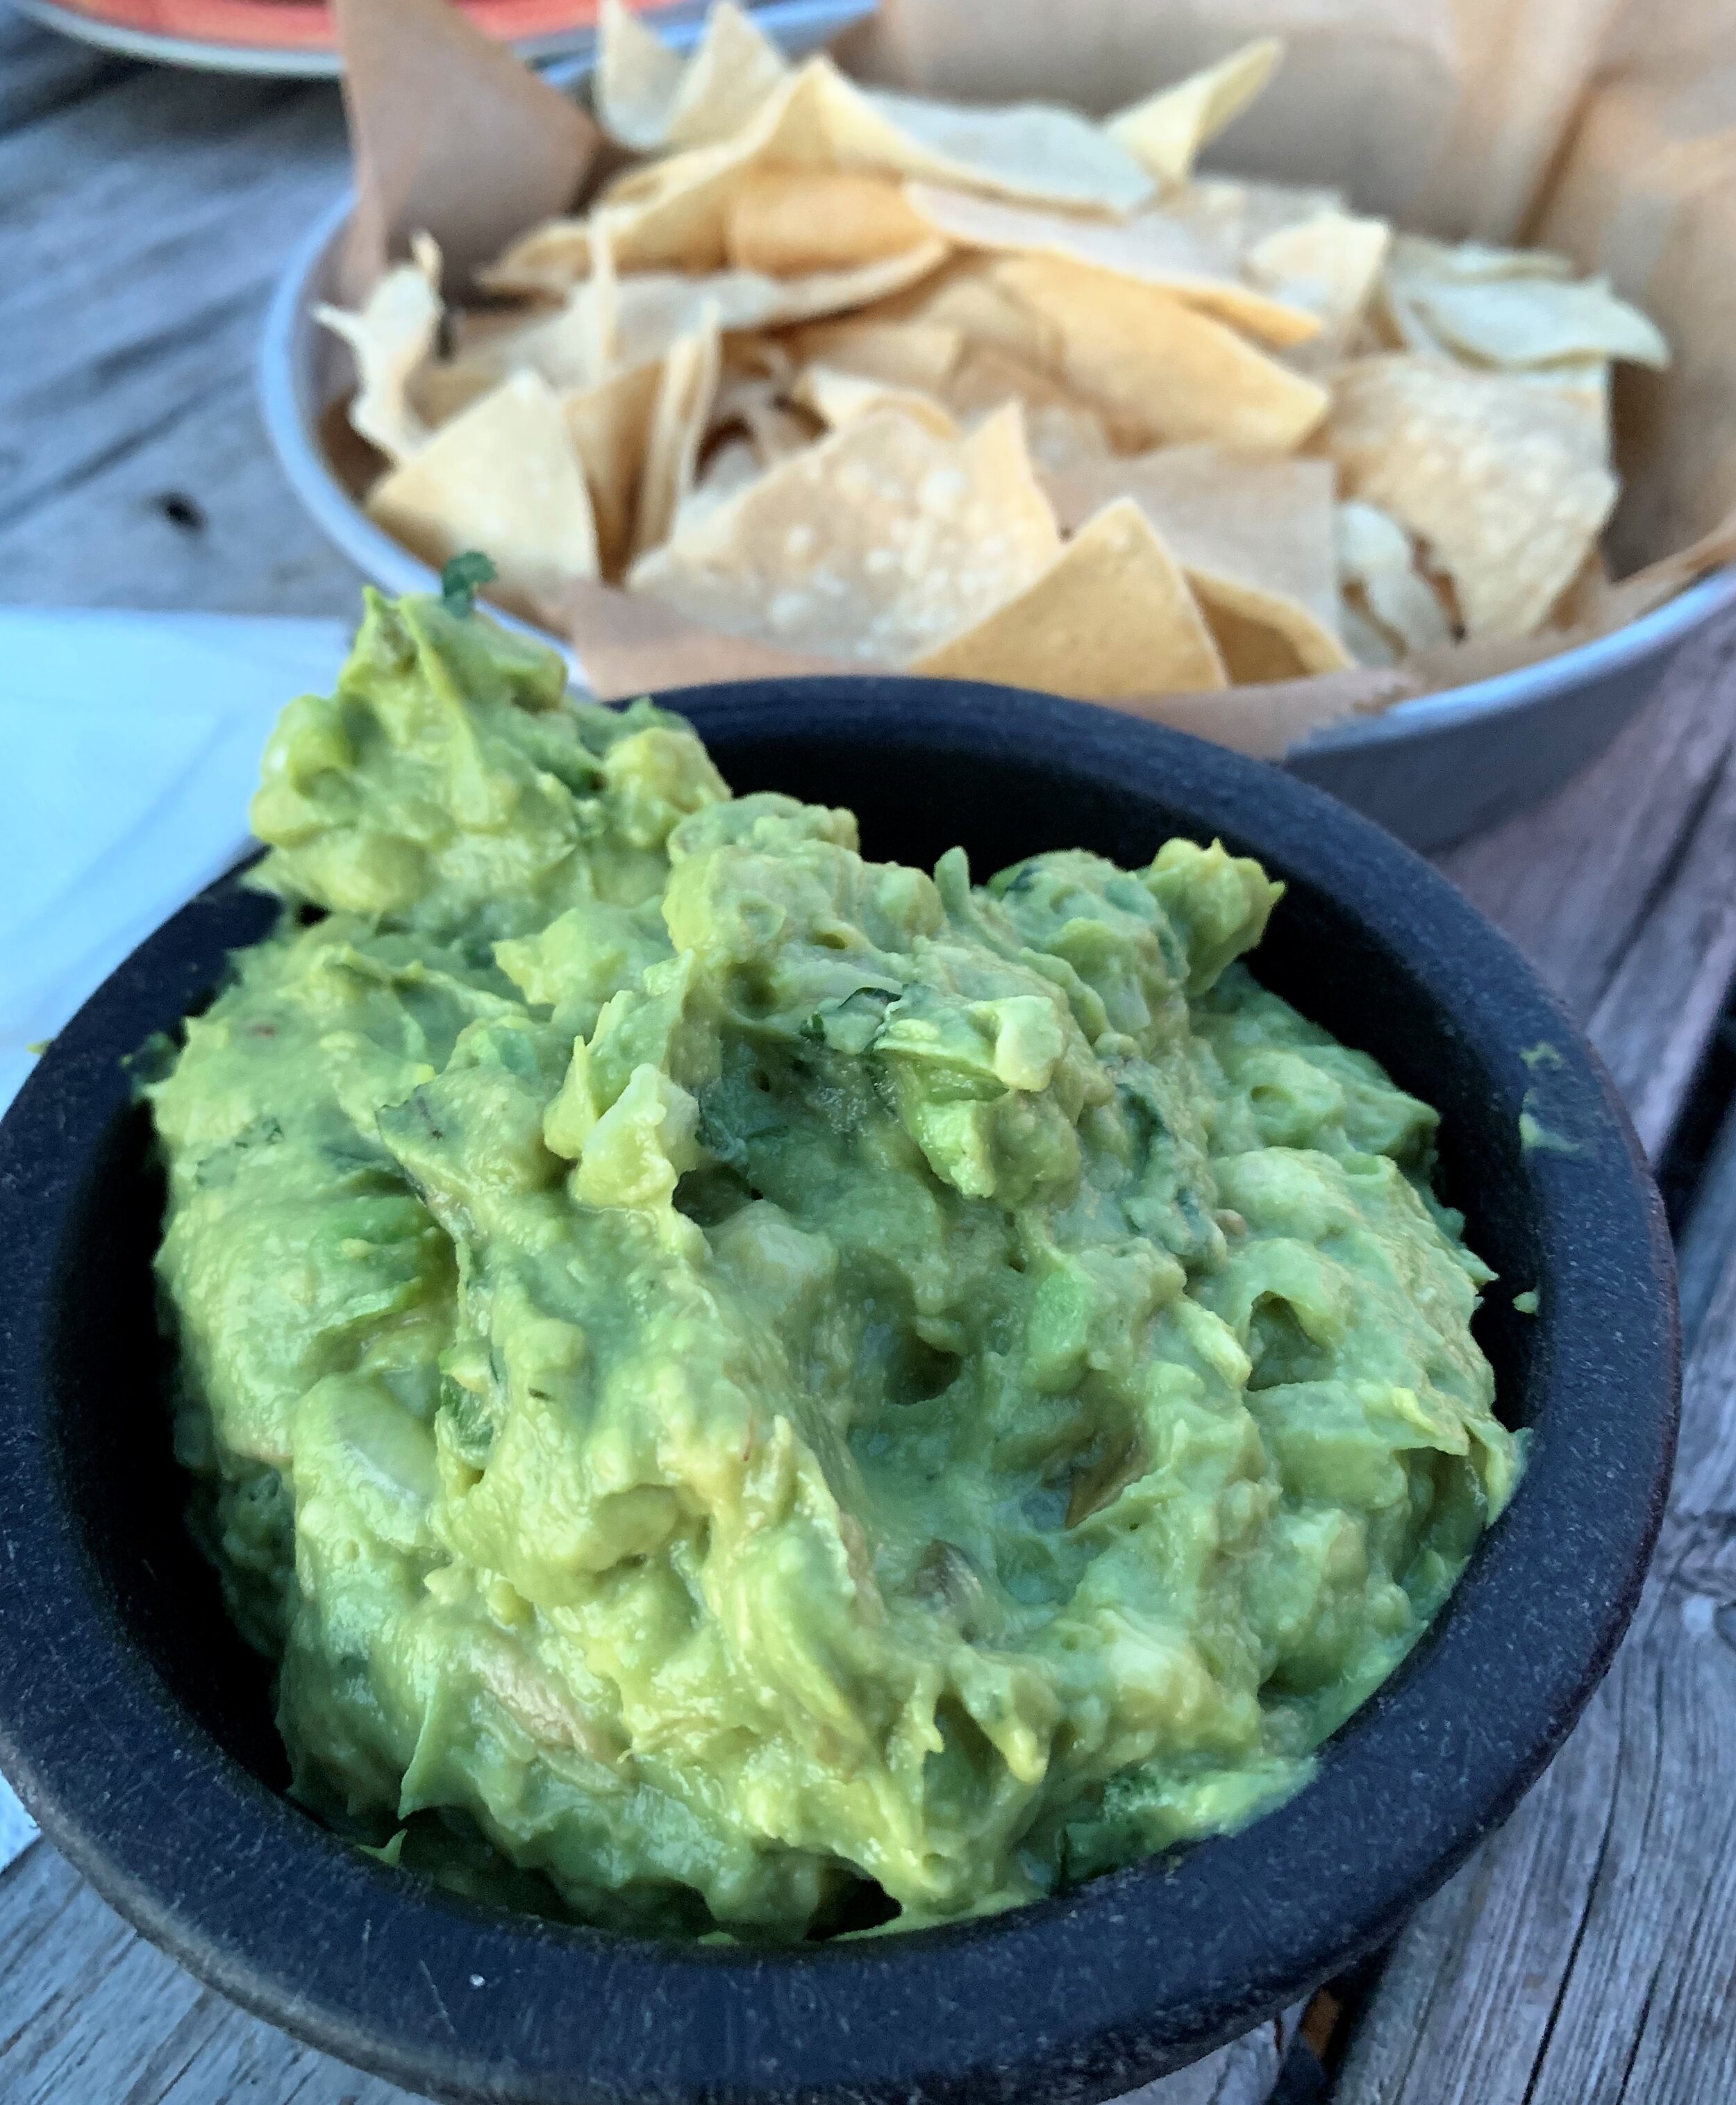 a dish of guacamole with tortilla chips in the background